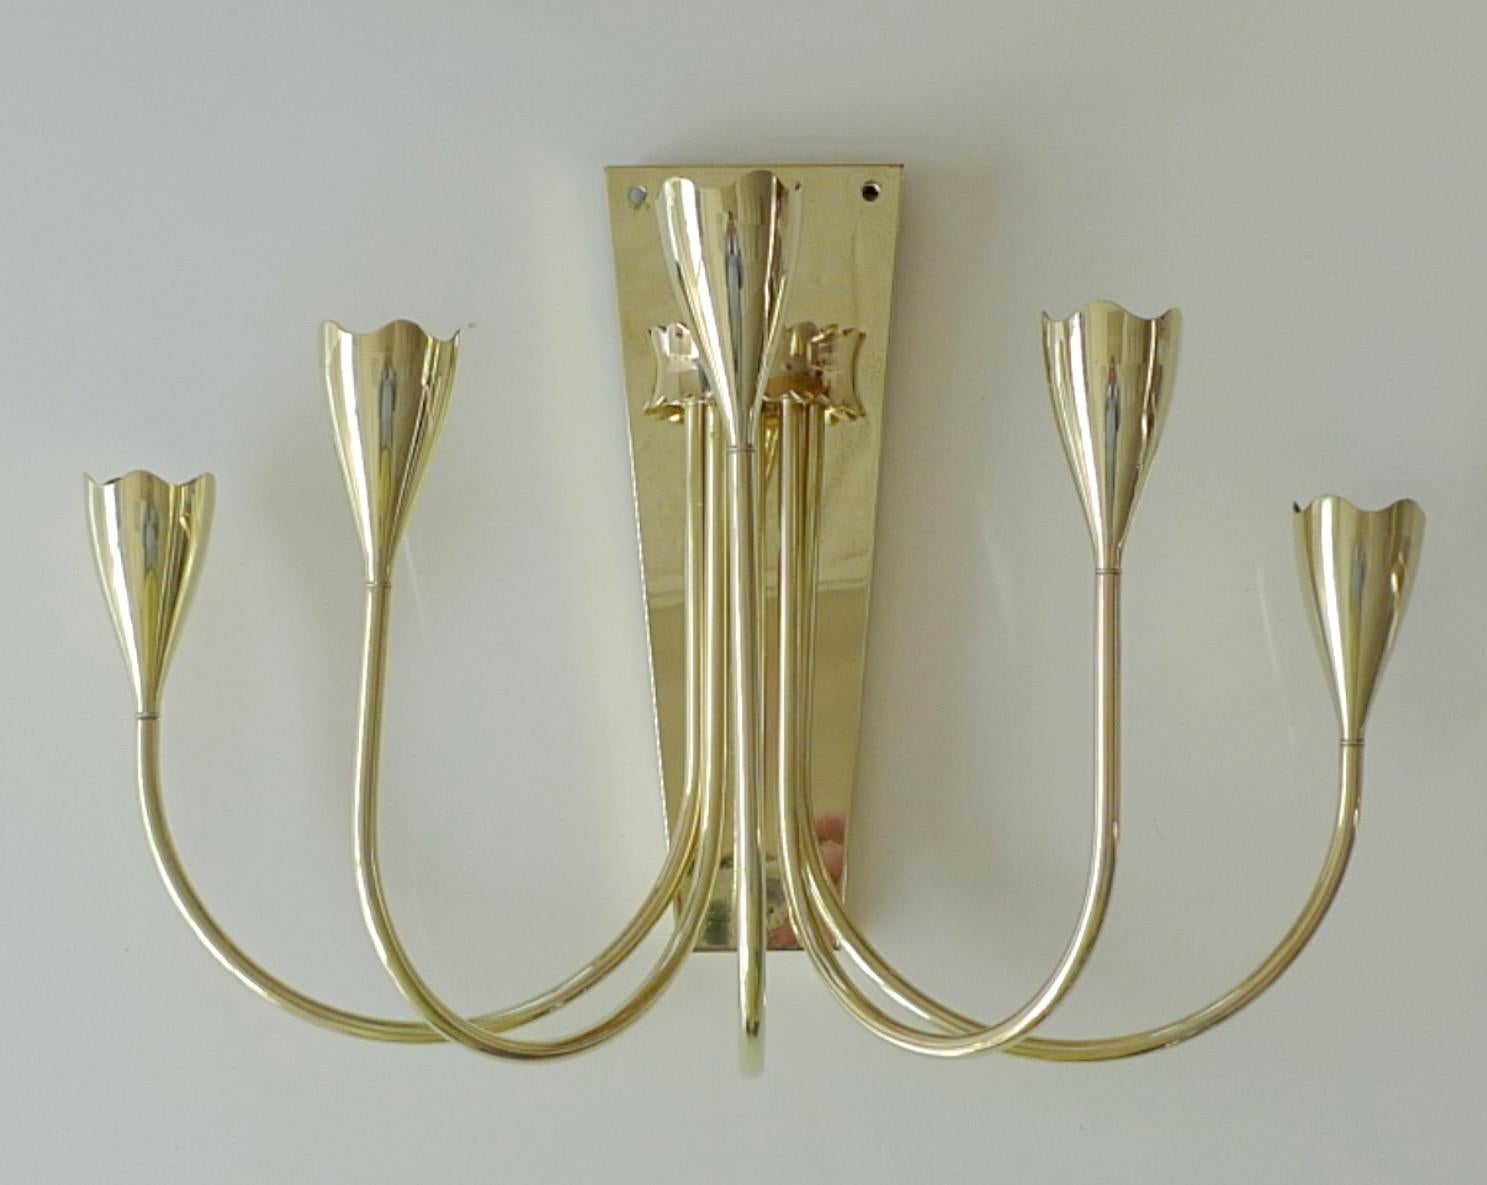 Pair of 1950's Italian Brass 5 Arm Candelabra Sconces For Sale 6